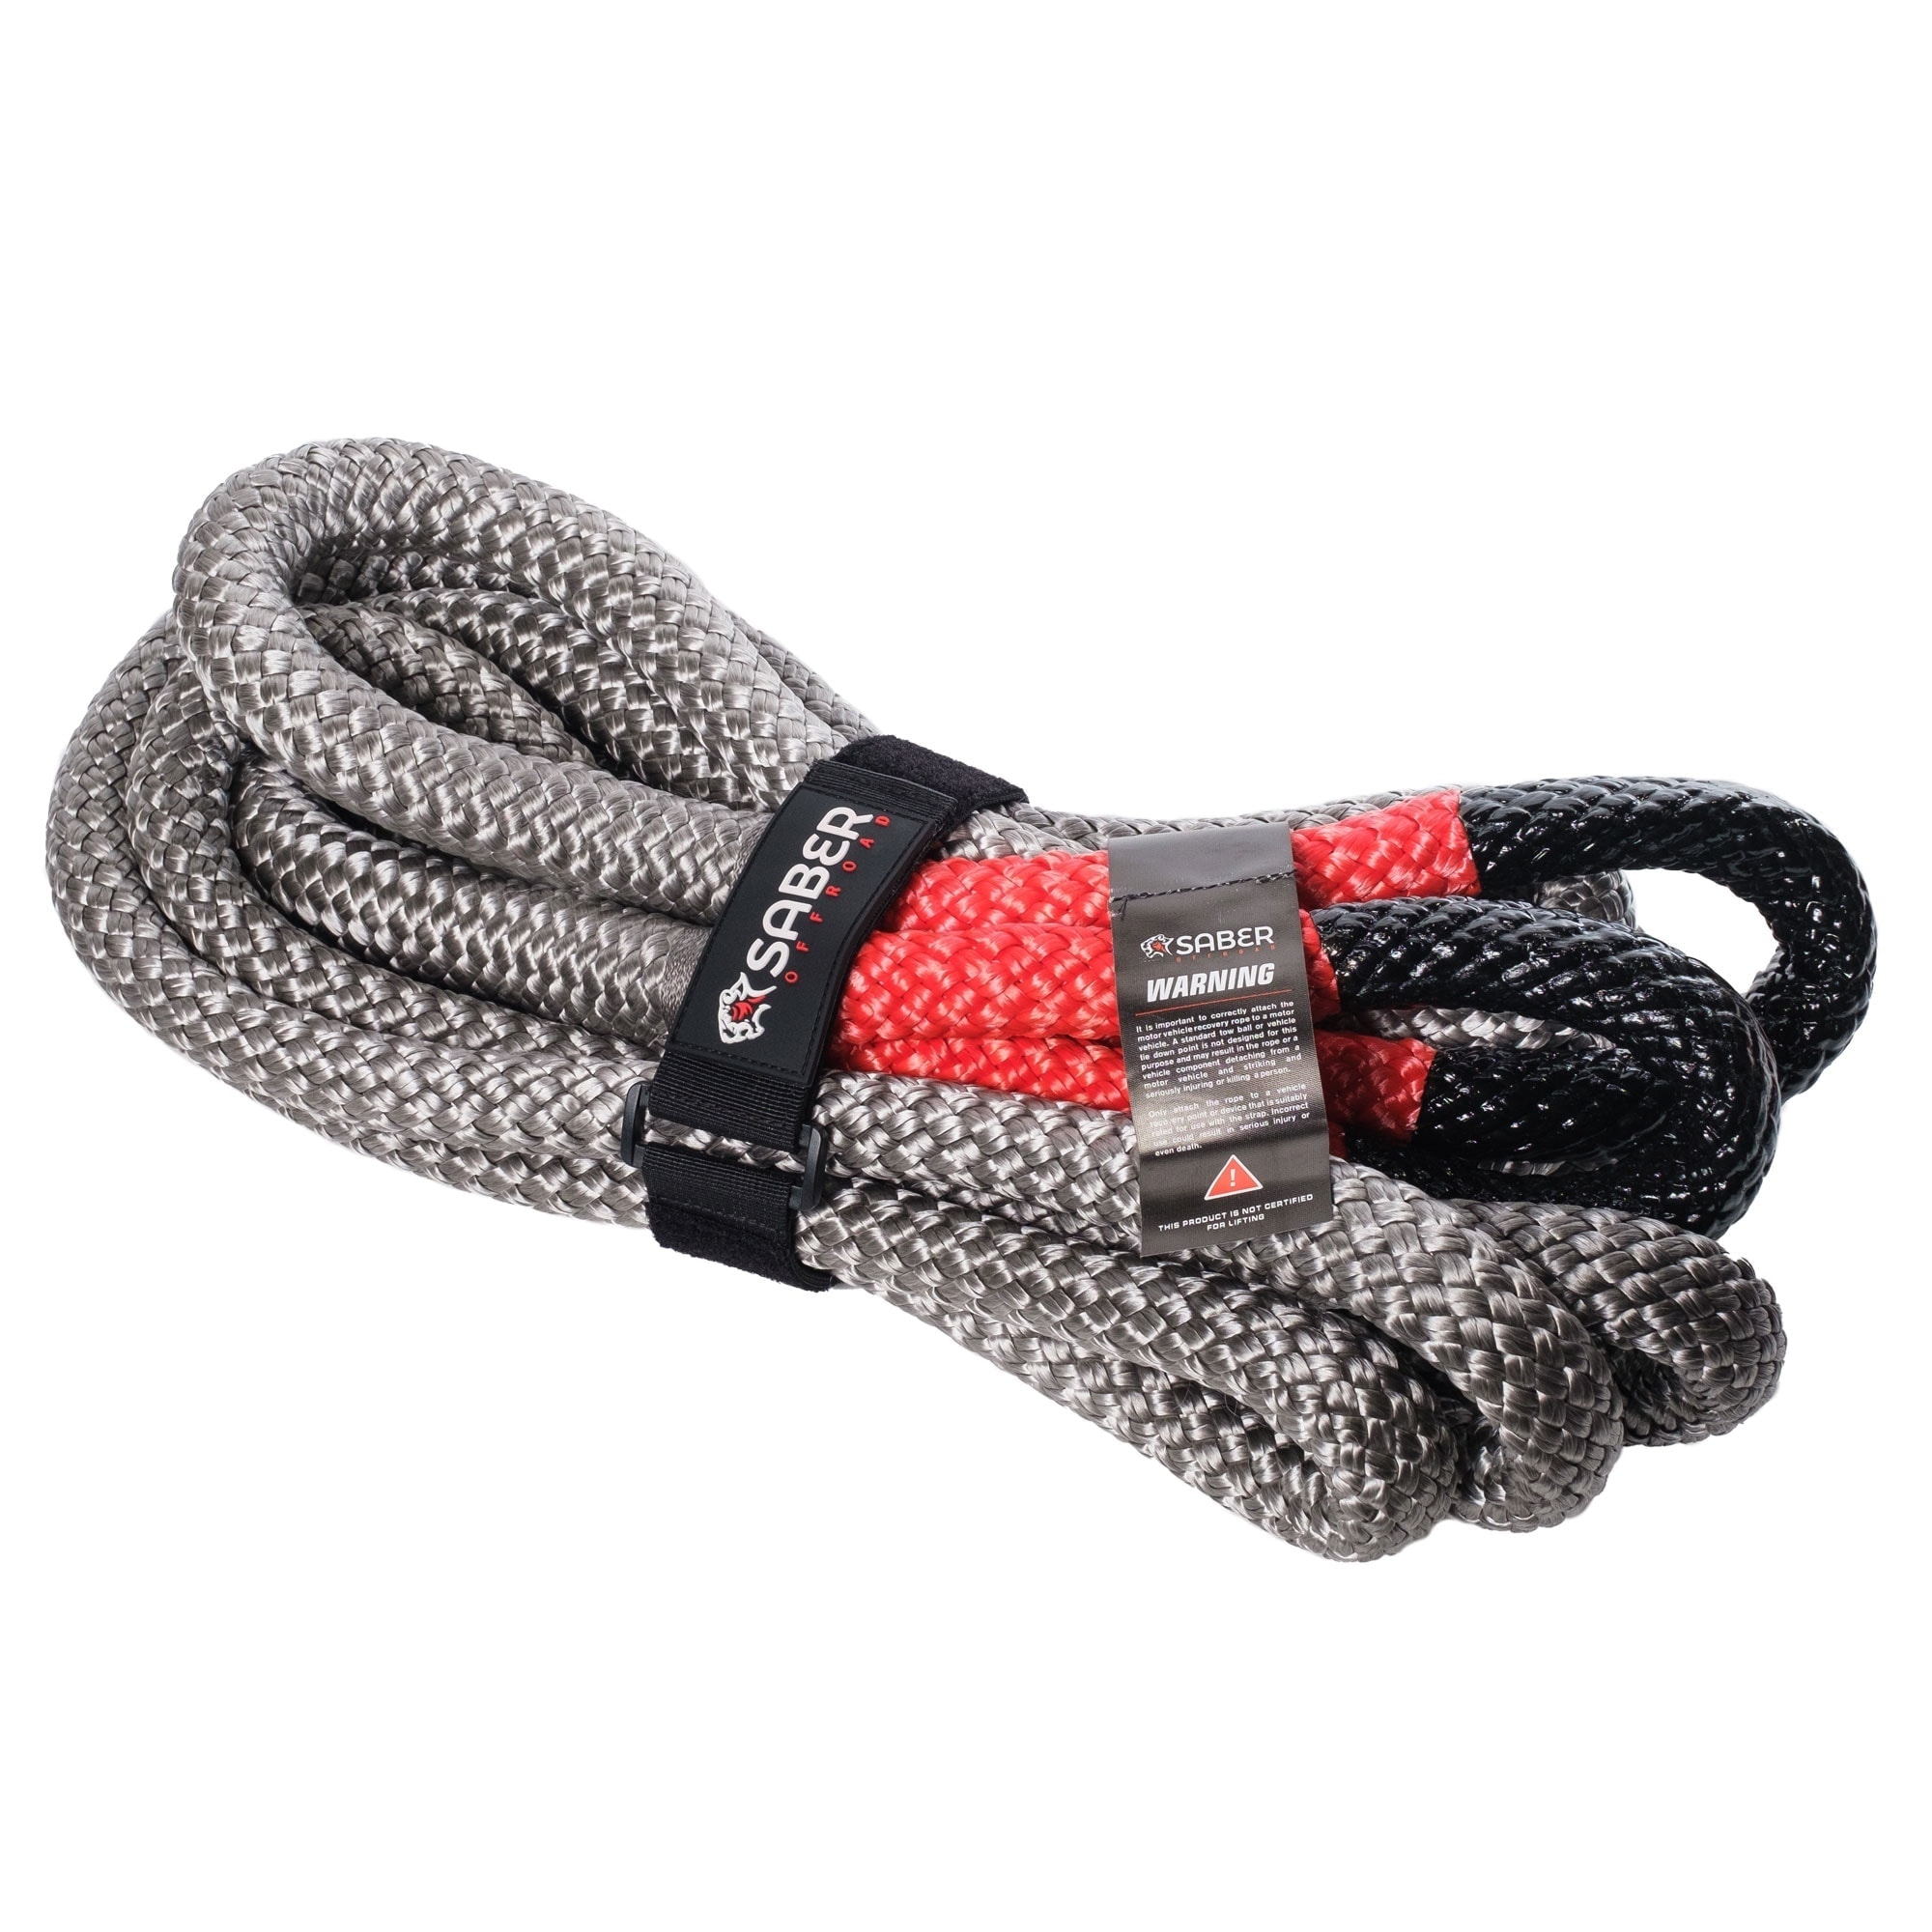 8 Metre long off road land rover 4x4 18mm Kinetic recovery snatch rope KERR 